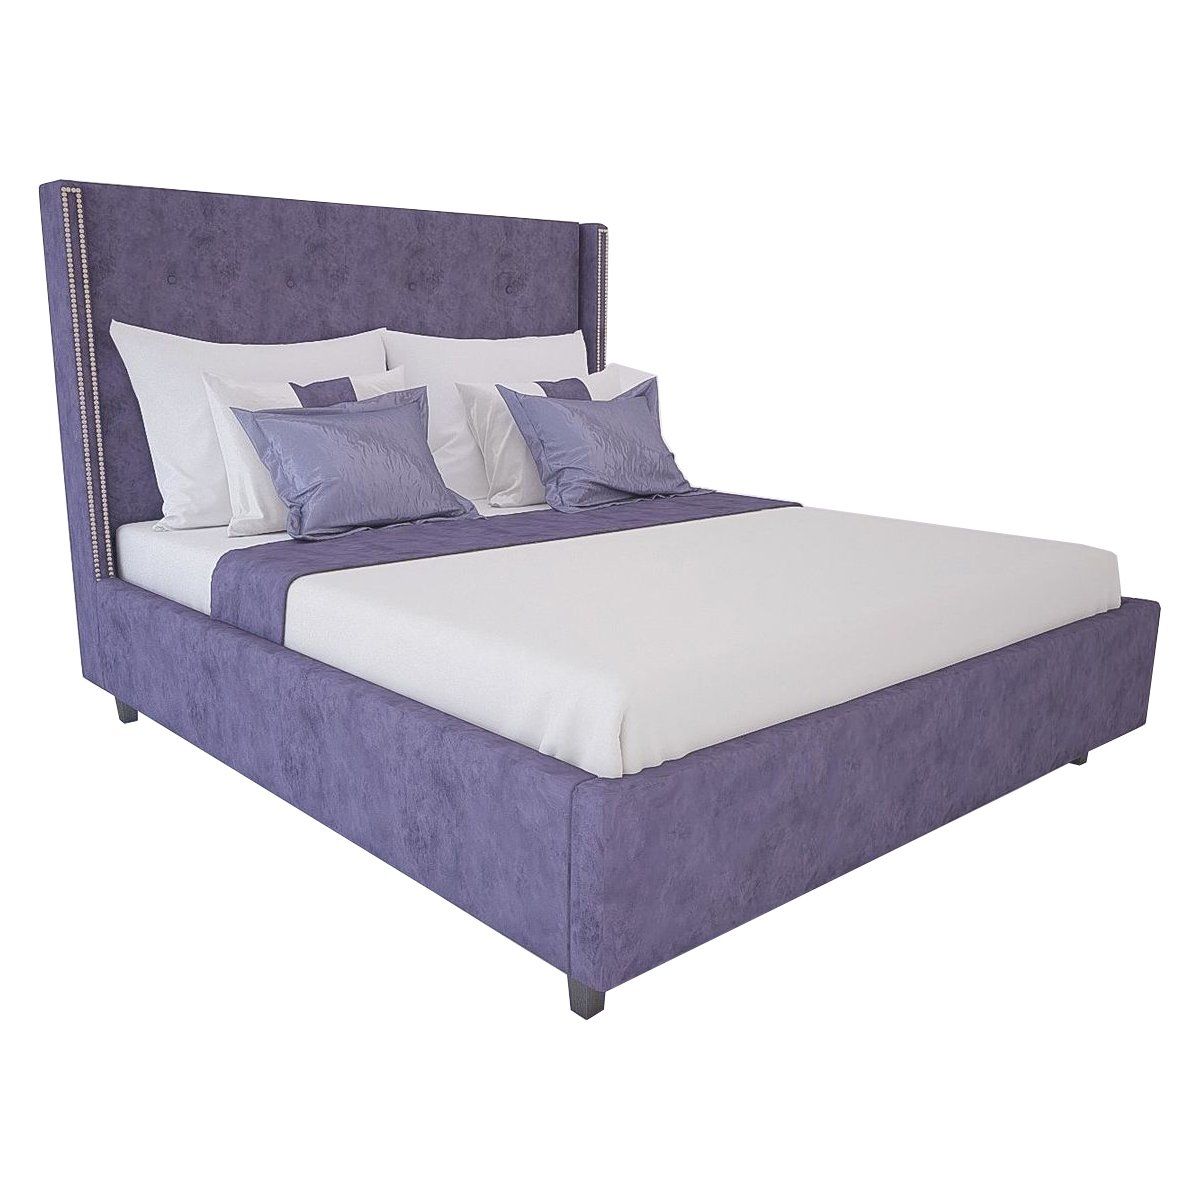 Double bed with upholstered headboard 160x200 cm purple Ansambel